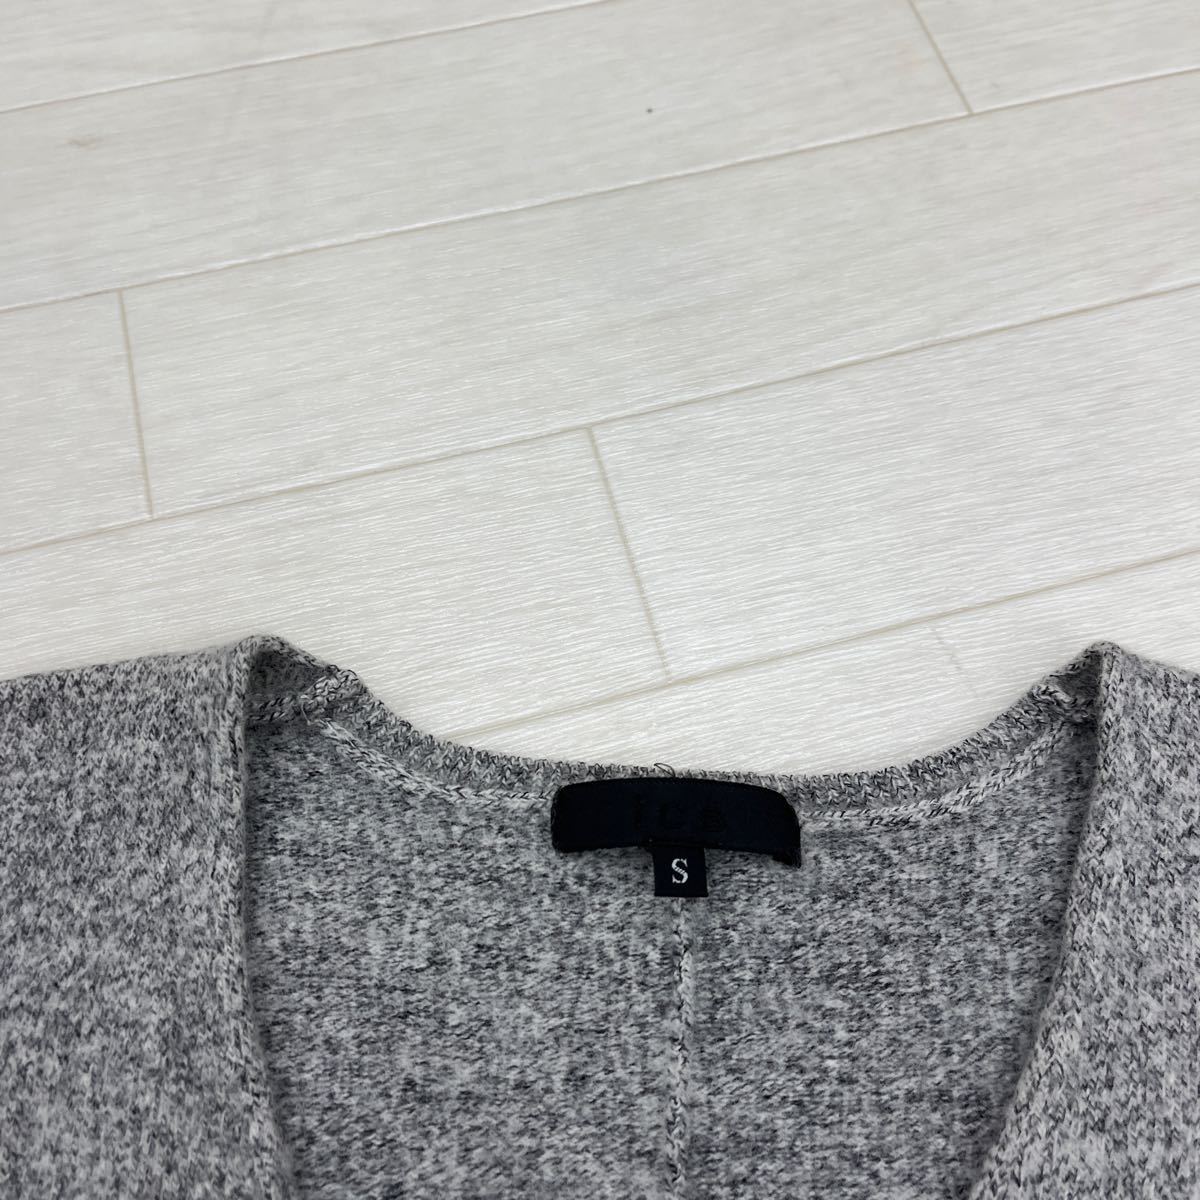 1310* ICB I si- Be tops pull over knitted sweater long sleeve plain casual cashmere mixing gray lady's S